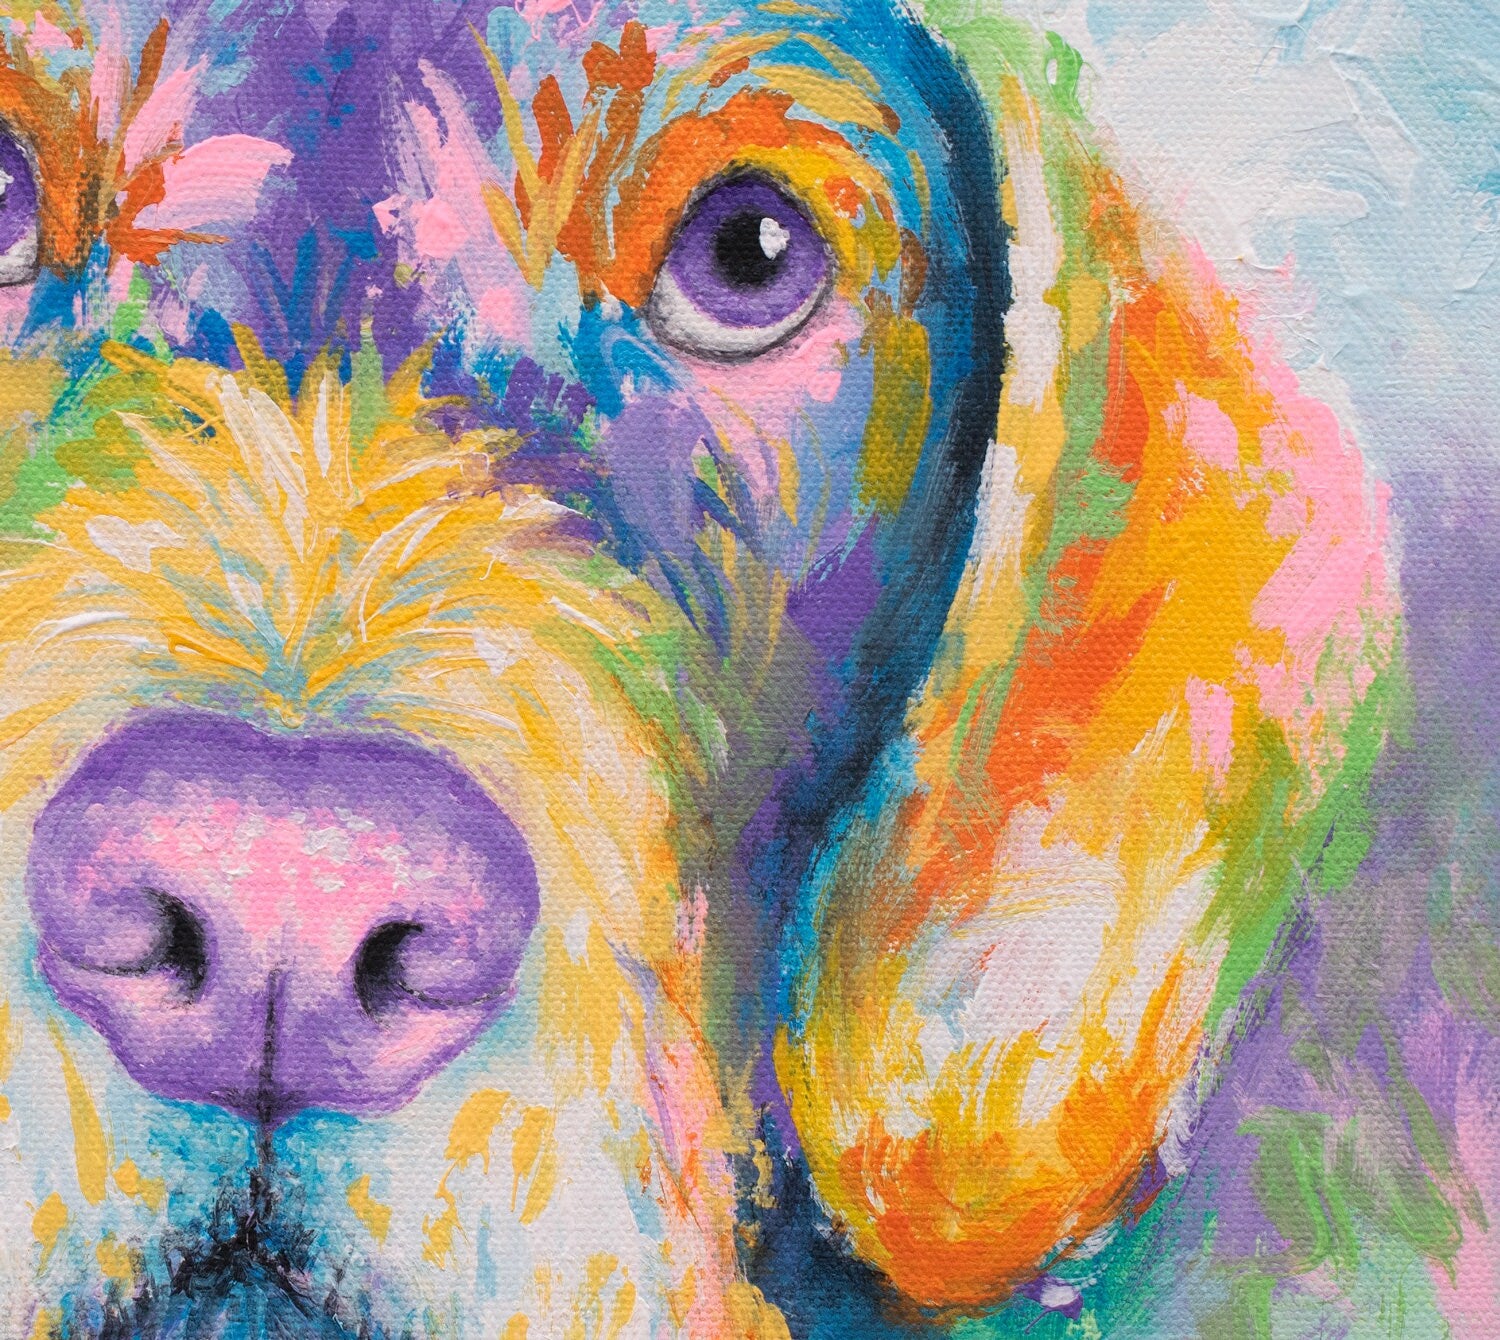 German Wirehaired Pointer Dog Art Print on CANVAS or PAPER. Rainbow Painting by Krystle Cole